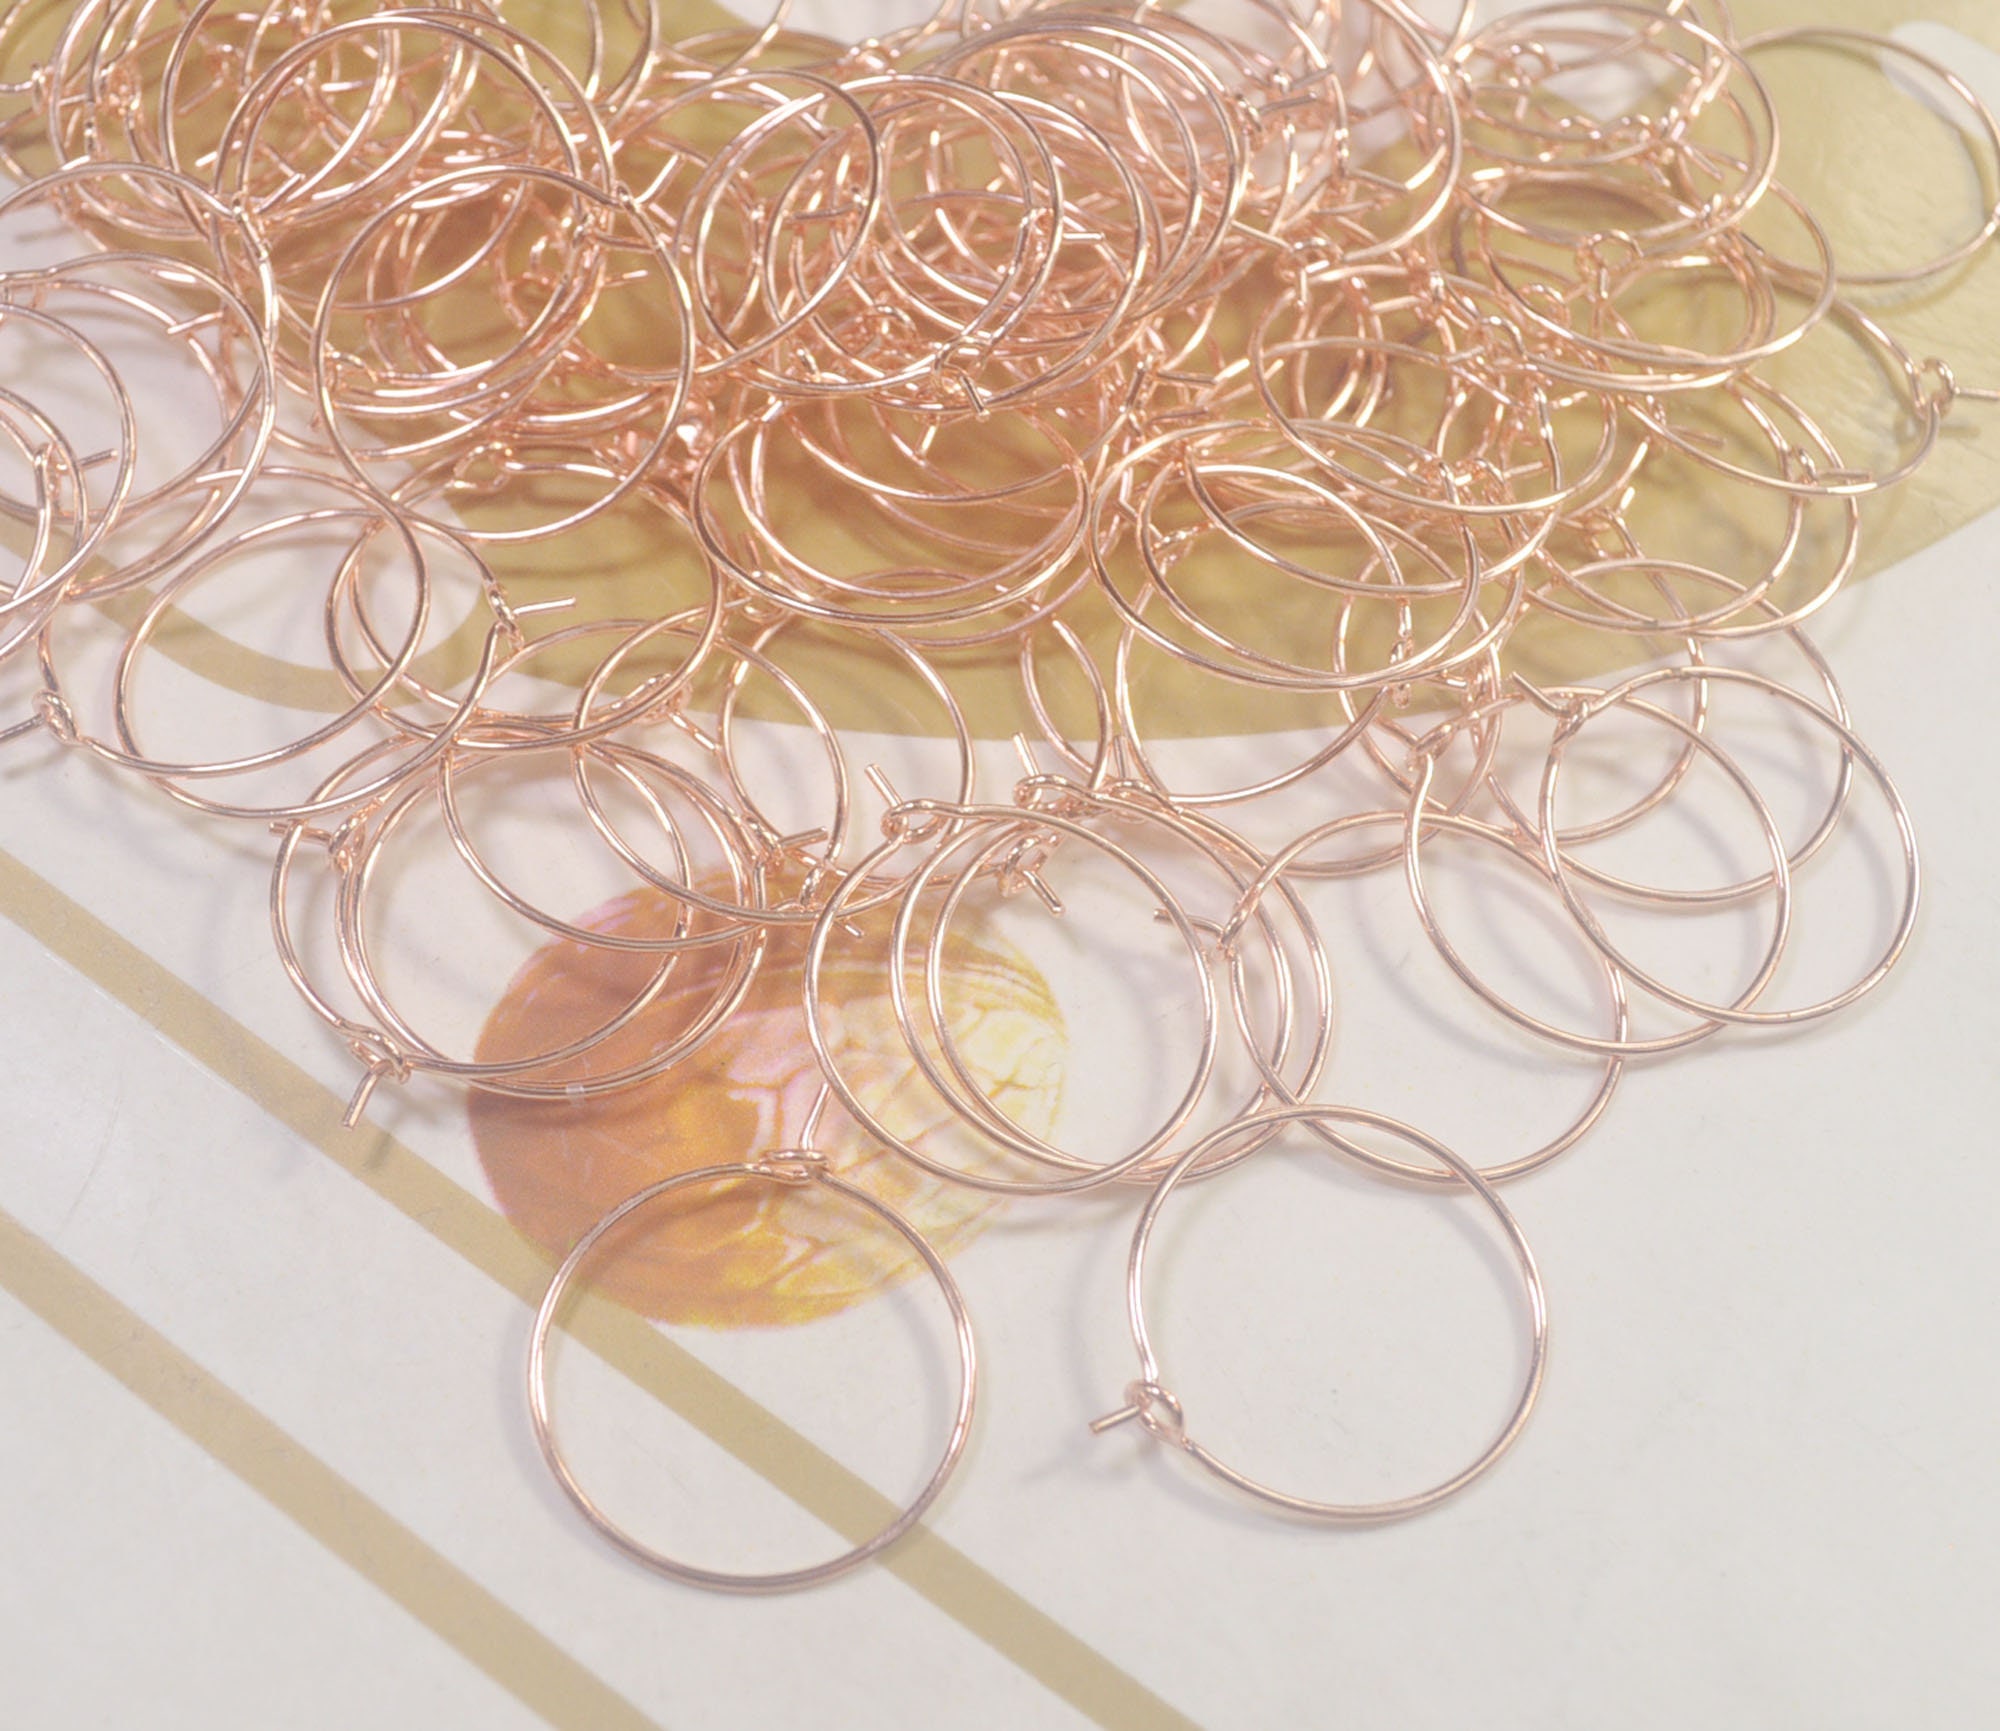 Silver, Gold & Rose Gold Wine Rings for DIY Wine Charms, Earring Hoop  Rings, Wine Glass Charm Rings, 20mm With Bent End, 10 or 25 Pieces 